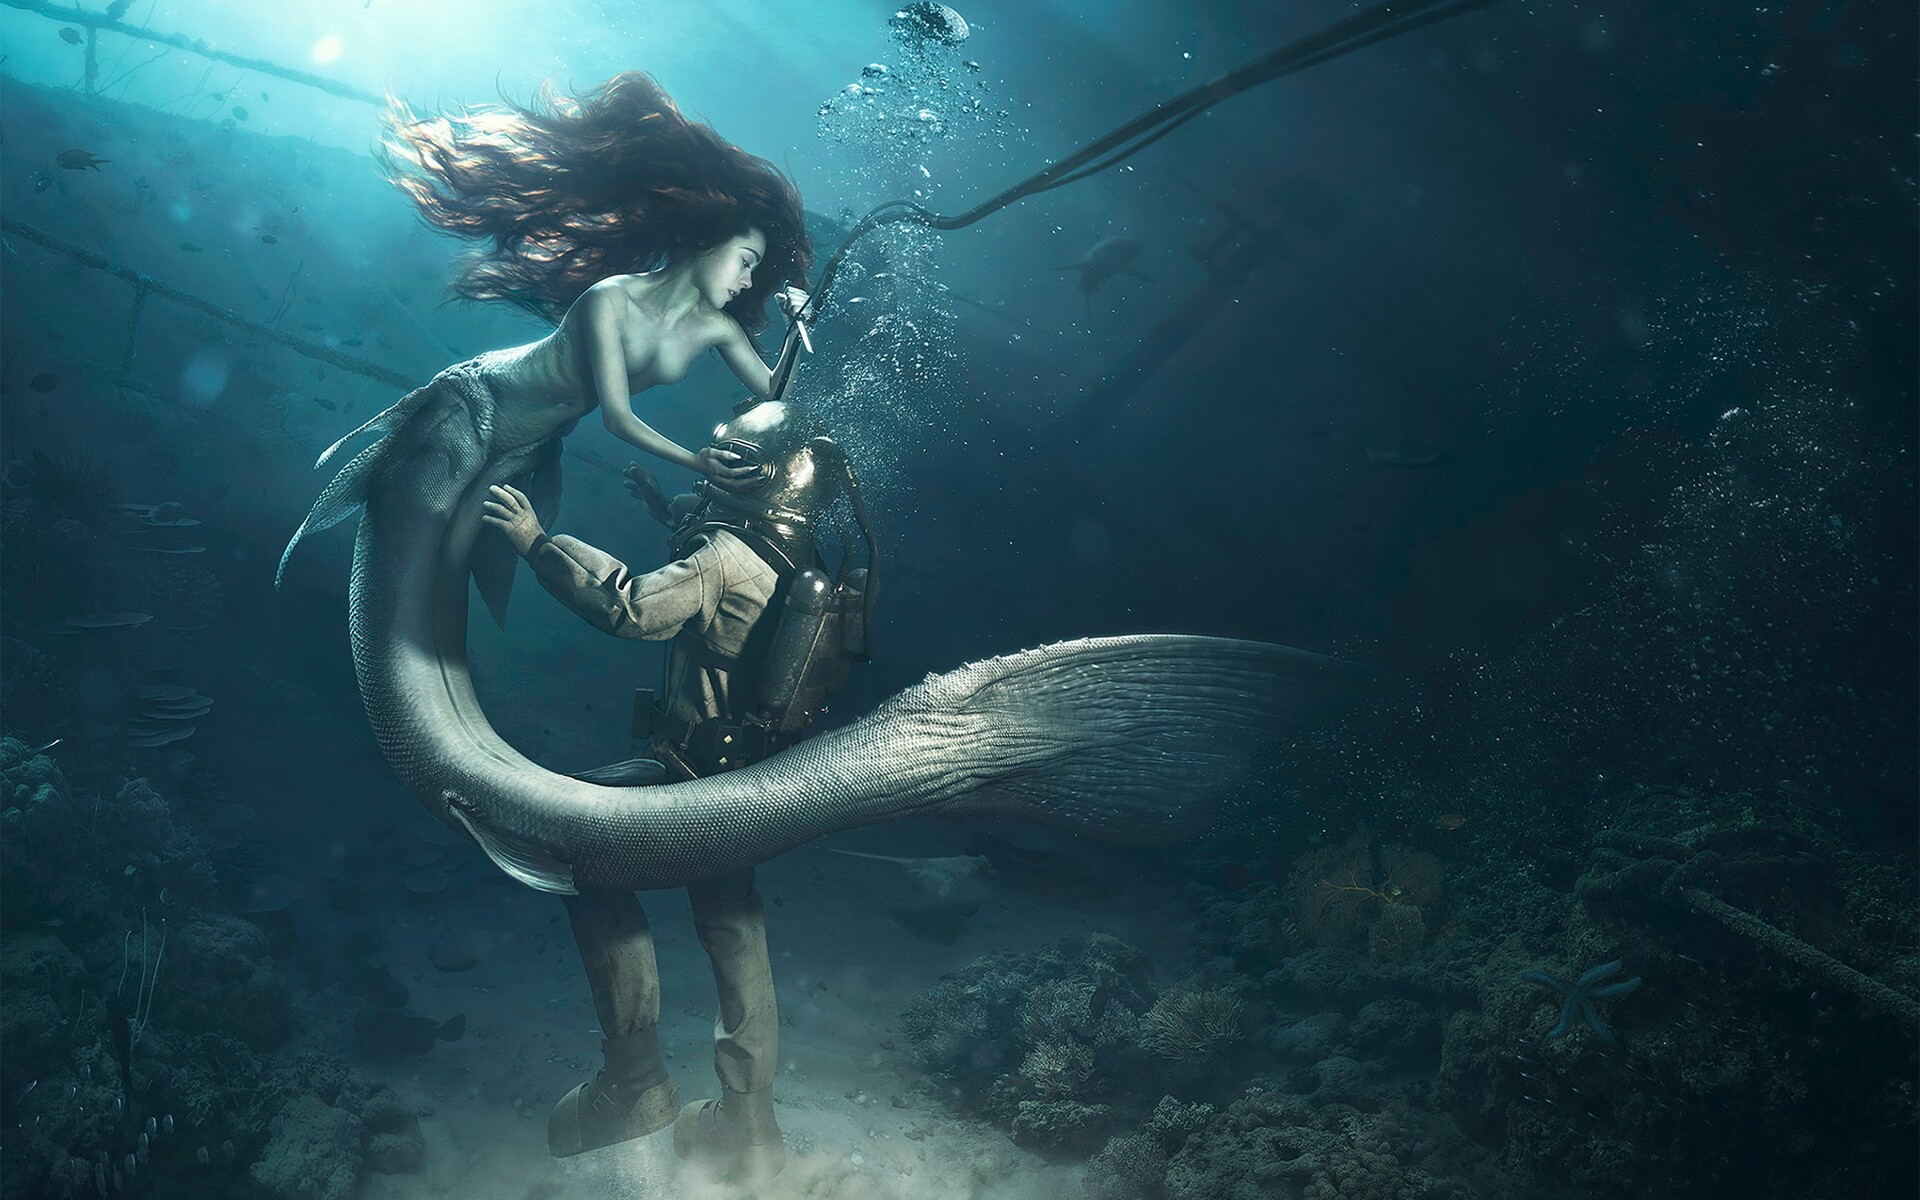 Witcher Mermaid Wallpapers